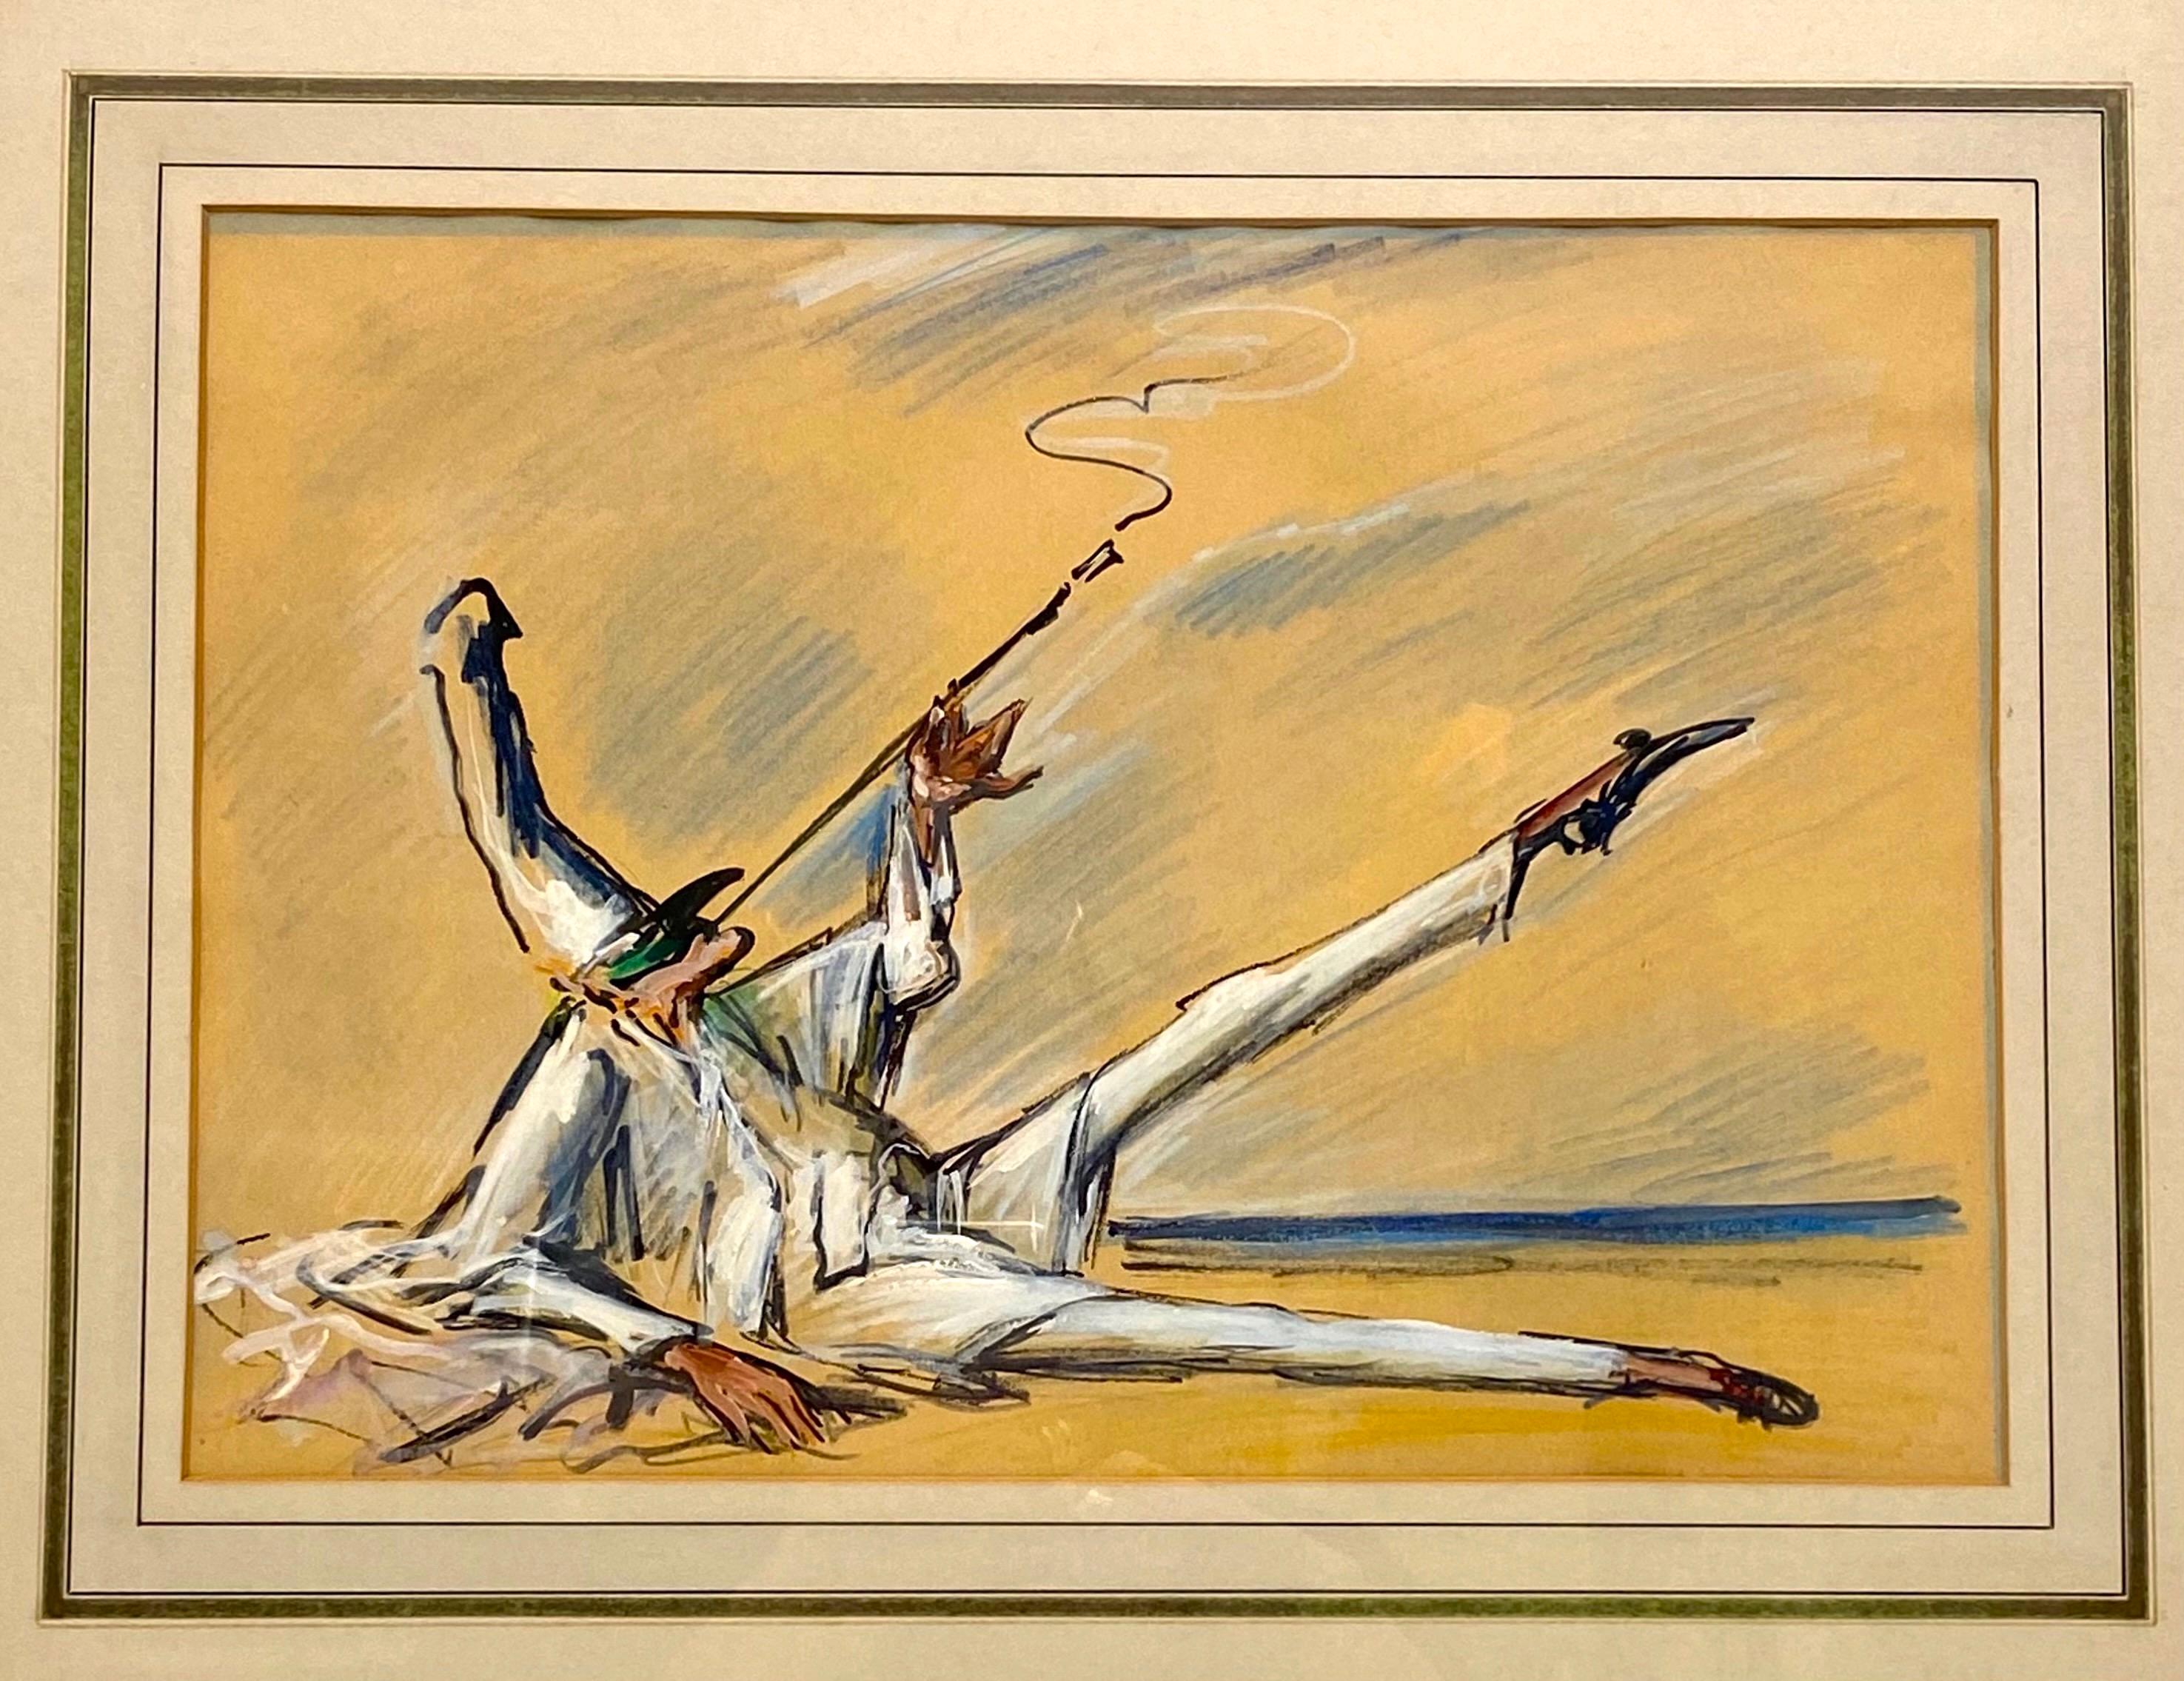 Ok this is so fun and whimsical yet beautifully done. A figure coming back from a Venetian ball having a dramatic smoke in his costume and mask. Note his cigarette holder and pointed toe are in sync! Most likely gouache or watercolor with oil stick